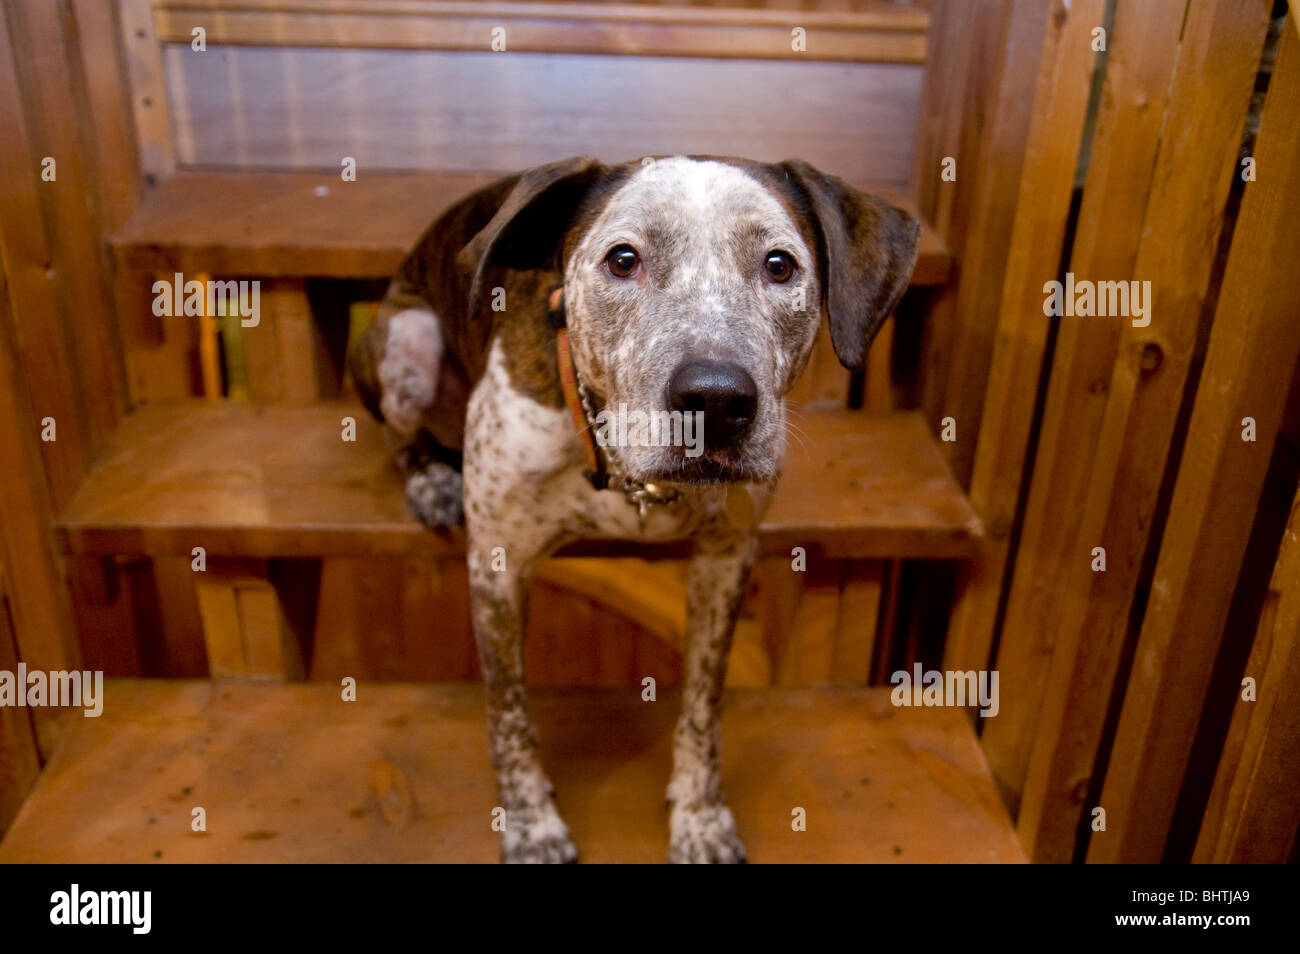 A dog sits and stands on wooden steps. Stock Photo